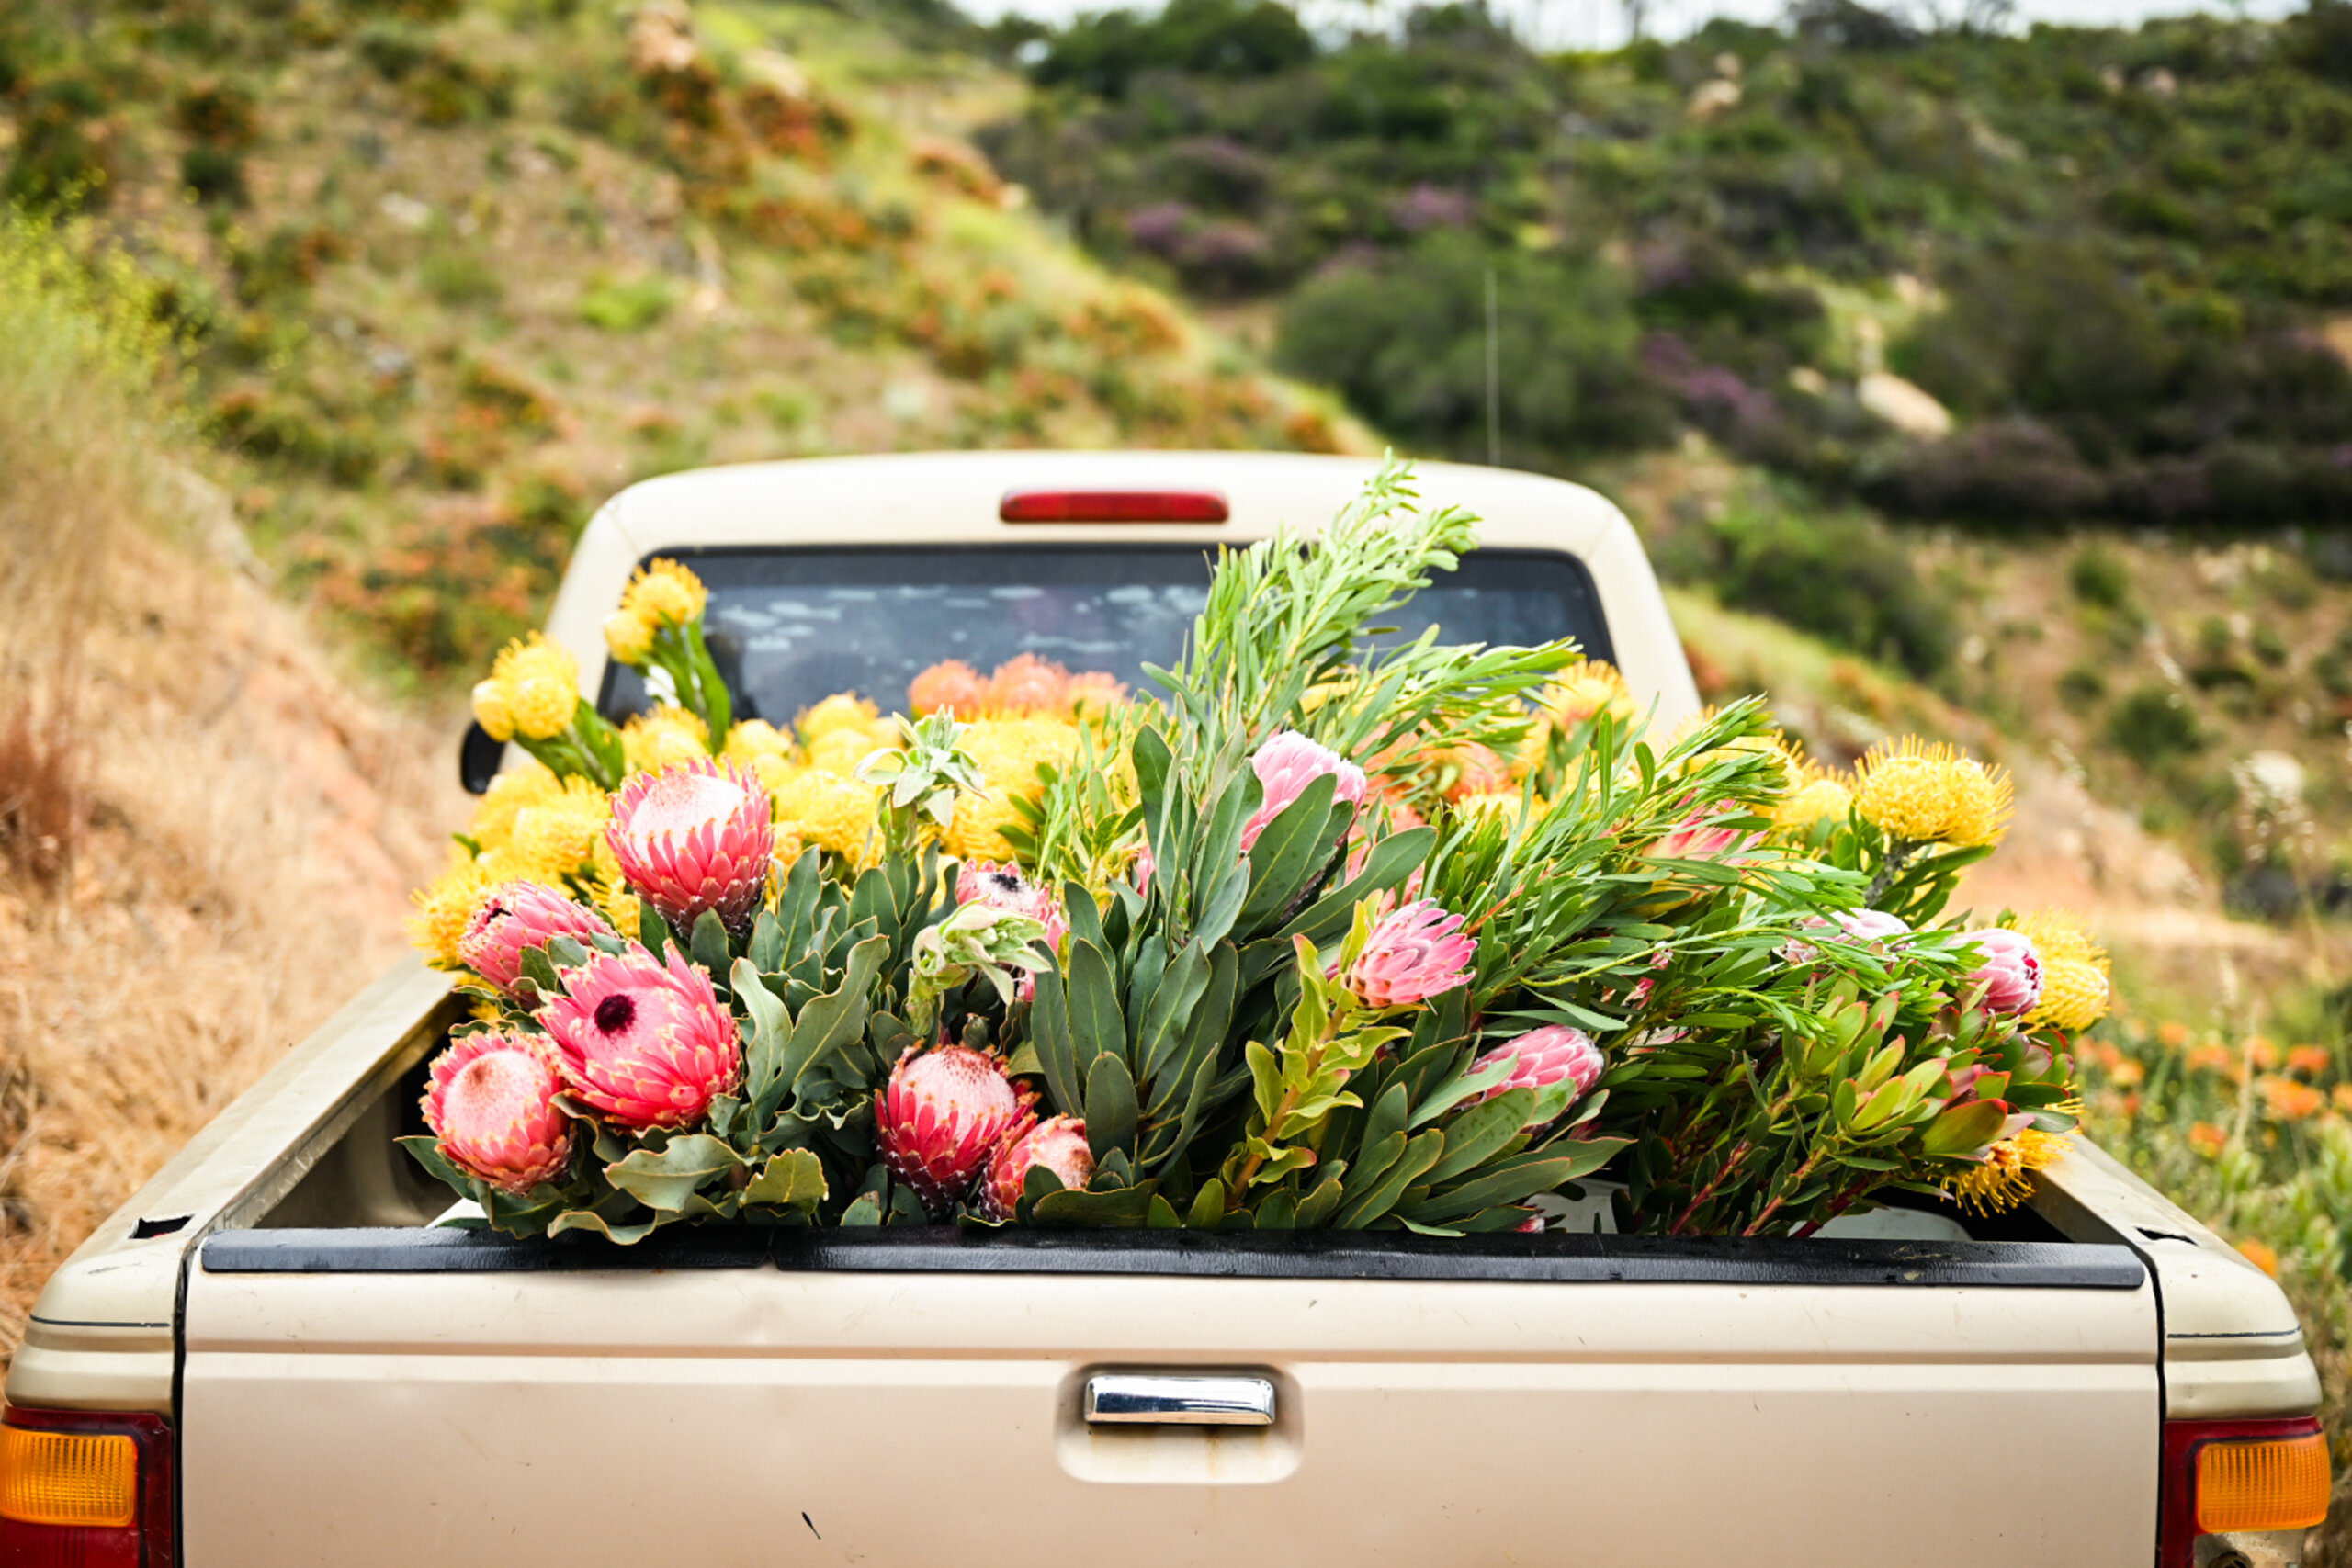 A truck bed filled with proteas harvested at Resendiz Brothers in Rainbow, California